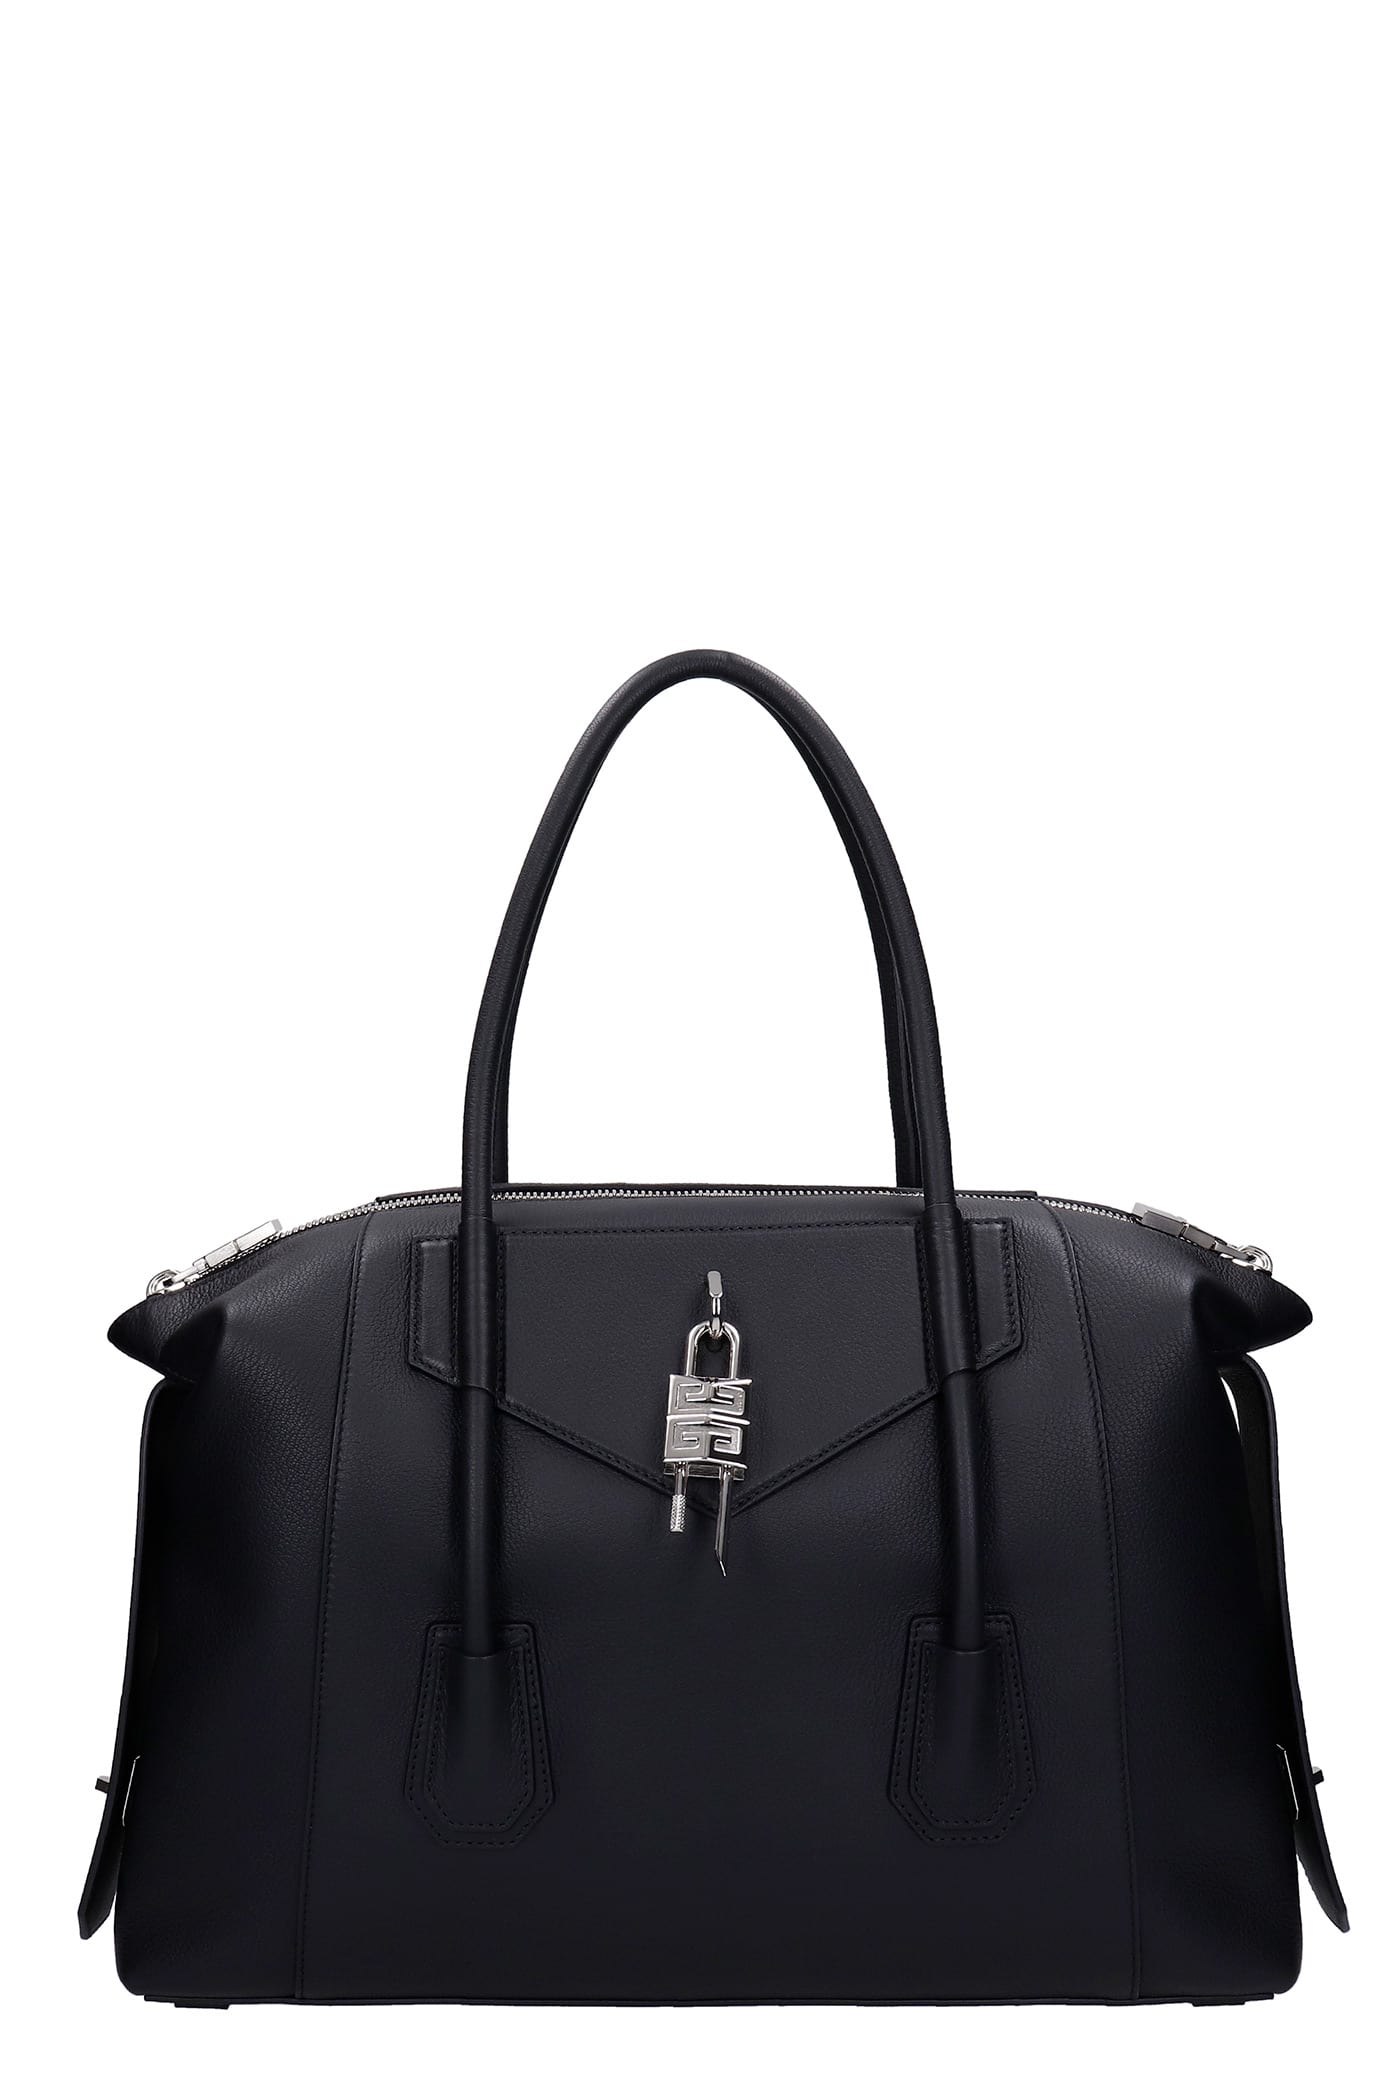 Givenchy Ant Soft Bag Hand Bag In Black Leather